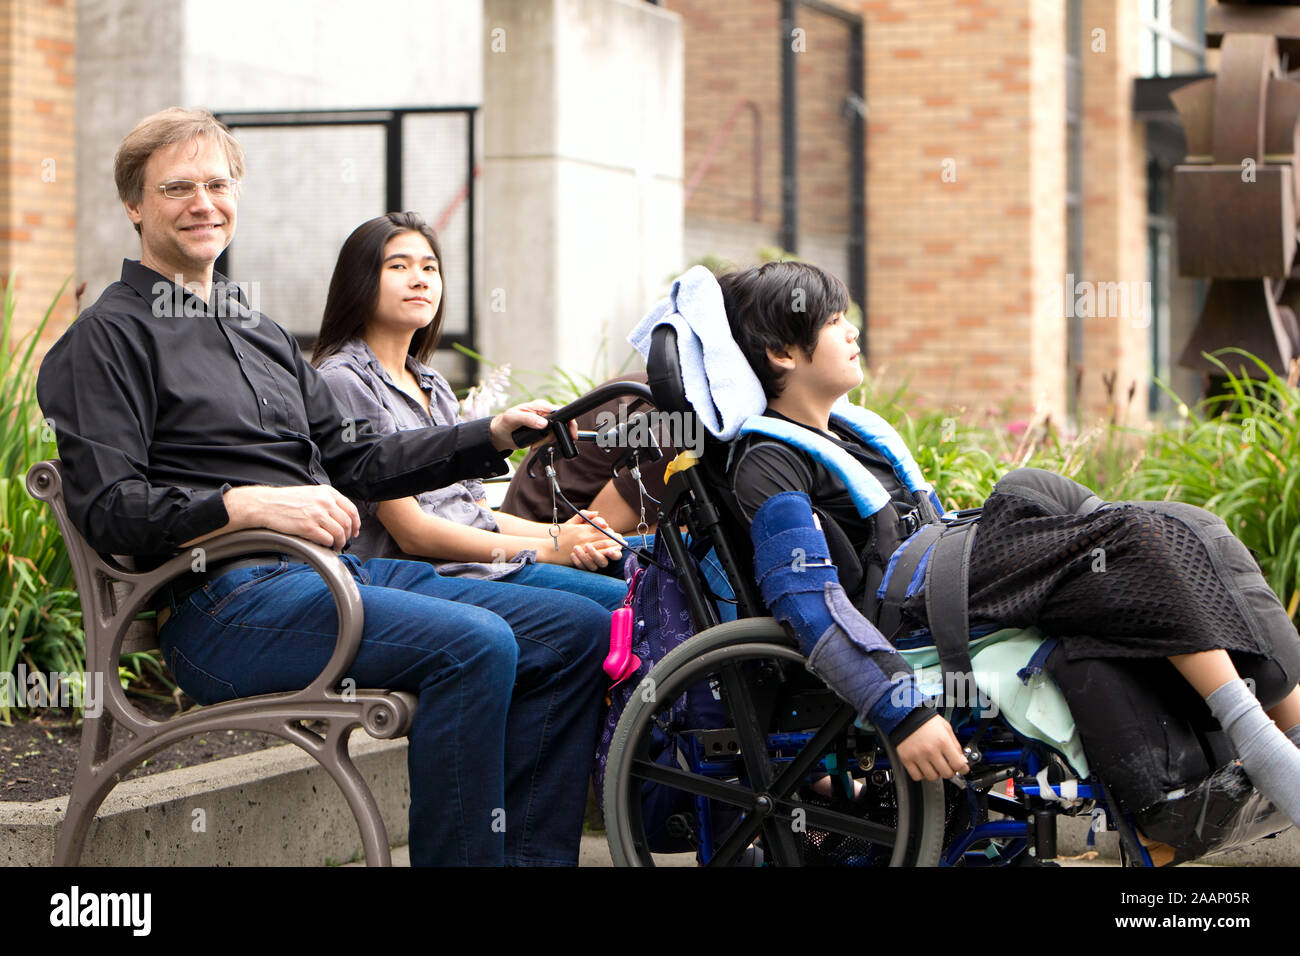 Multiracial family with special needs child sitting outdoors together on summer day. Child is sitting in wheelchair. Stock Photo